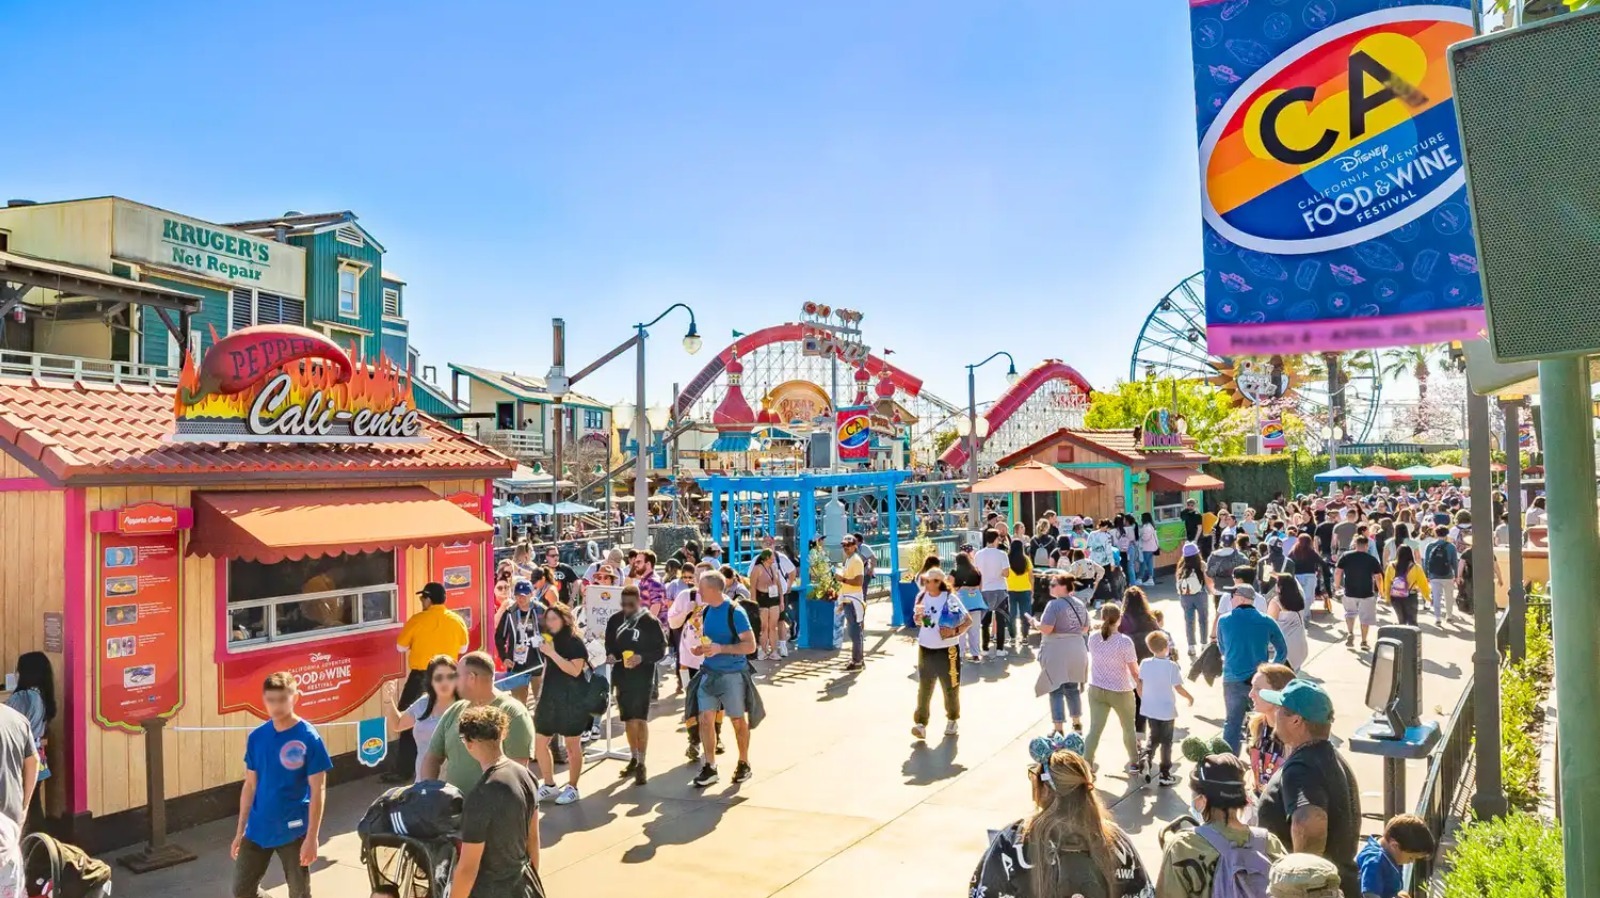 https://www.thedailymeal.com/img/gallery/a-complete-guide-to-the-disneyland-california-adventure-food-wine-festival/l-intro-1678136413.jpg